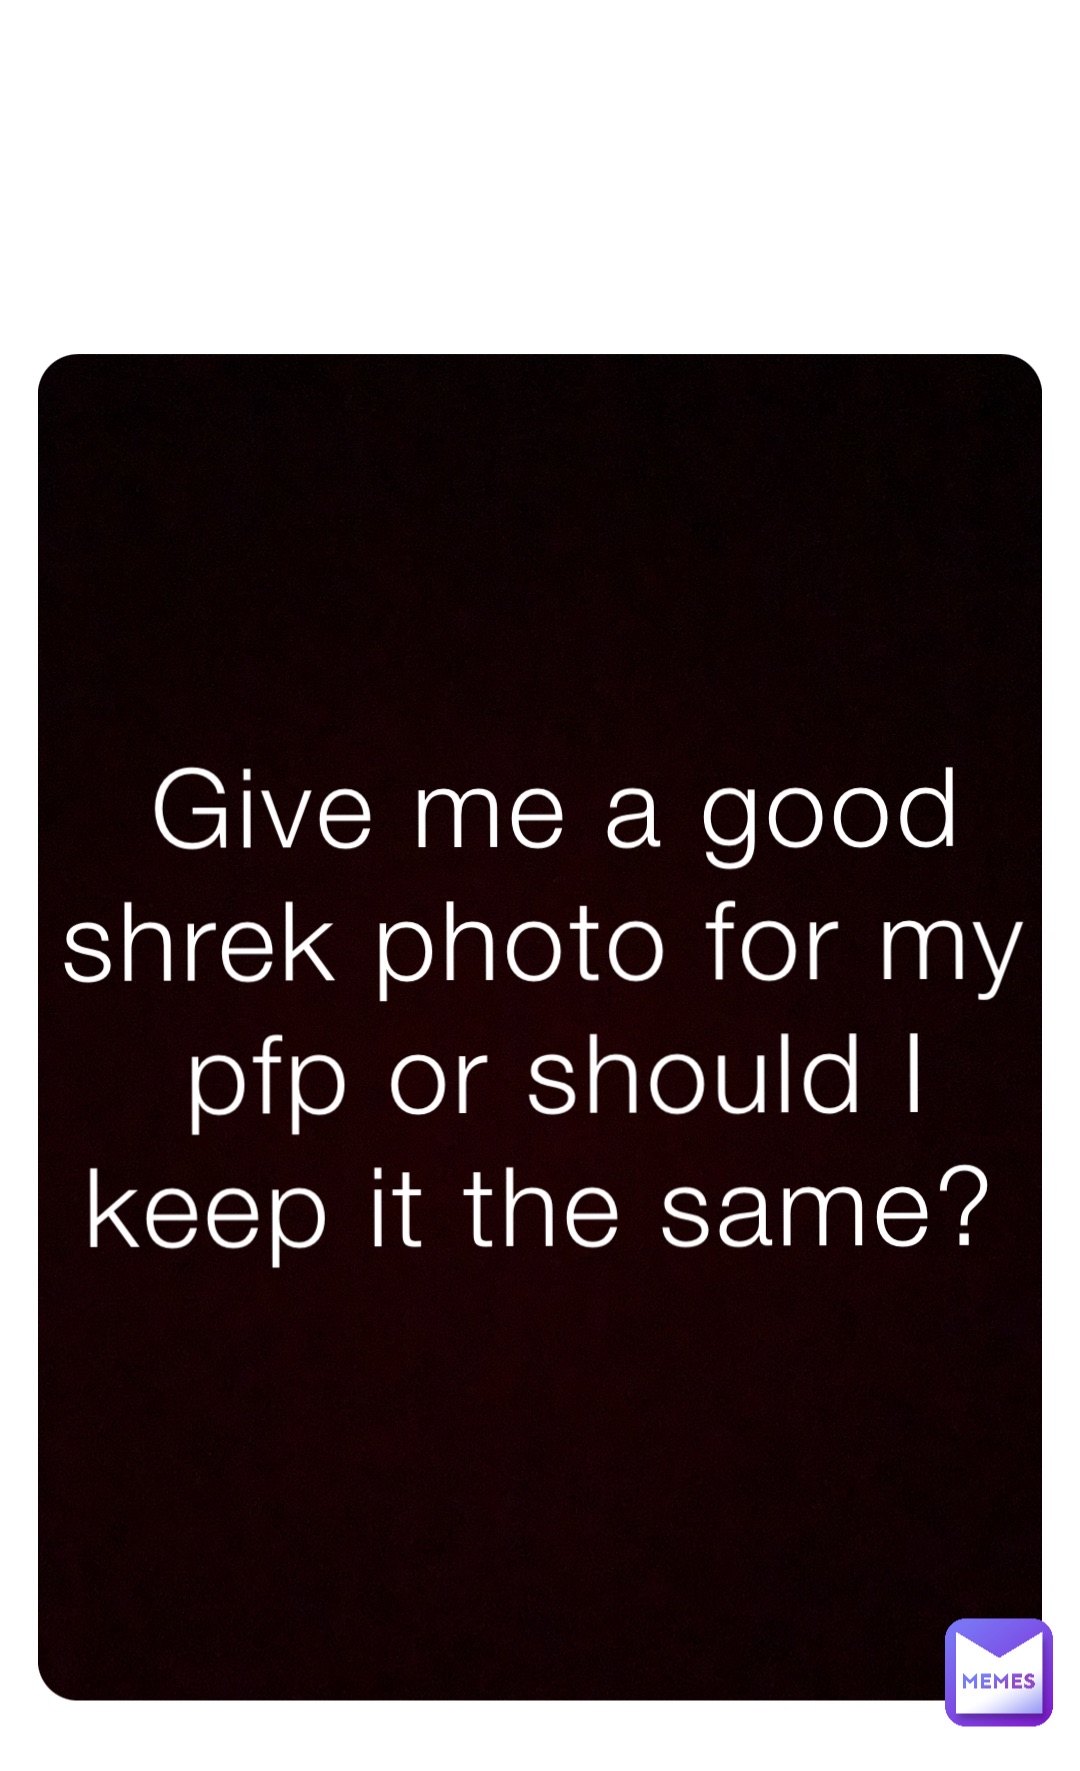 Give me a good shrek photo for my pfp or should I keep it the same?